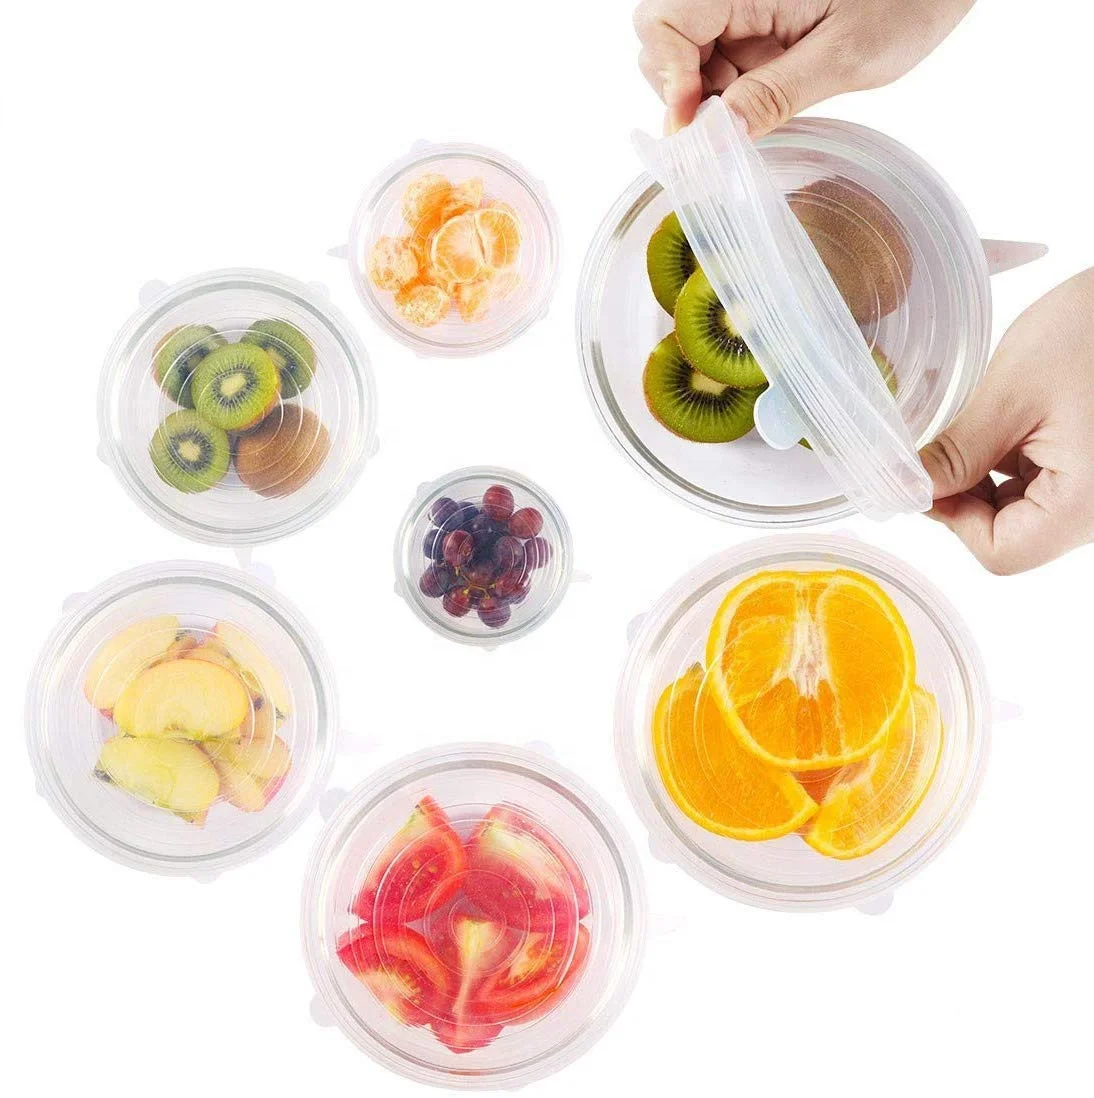 
Reusable 7 pack of Silicone Stretch Lids for Keeping Food Fresh Dishwasher & Freezer Safe 